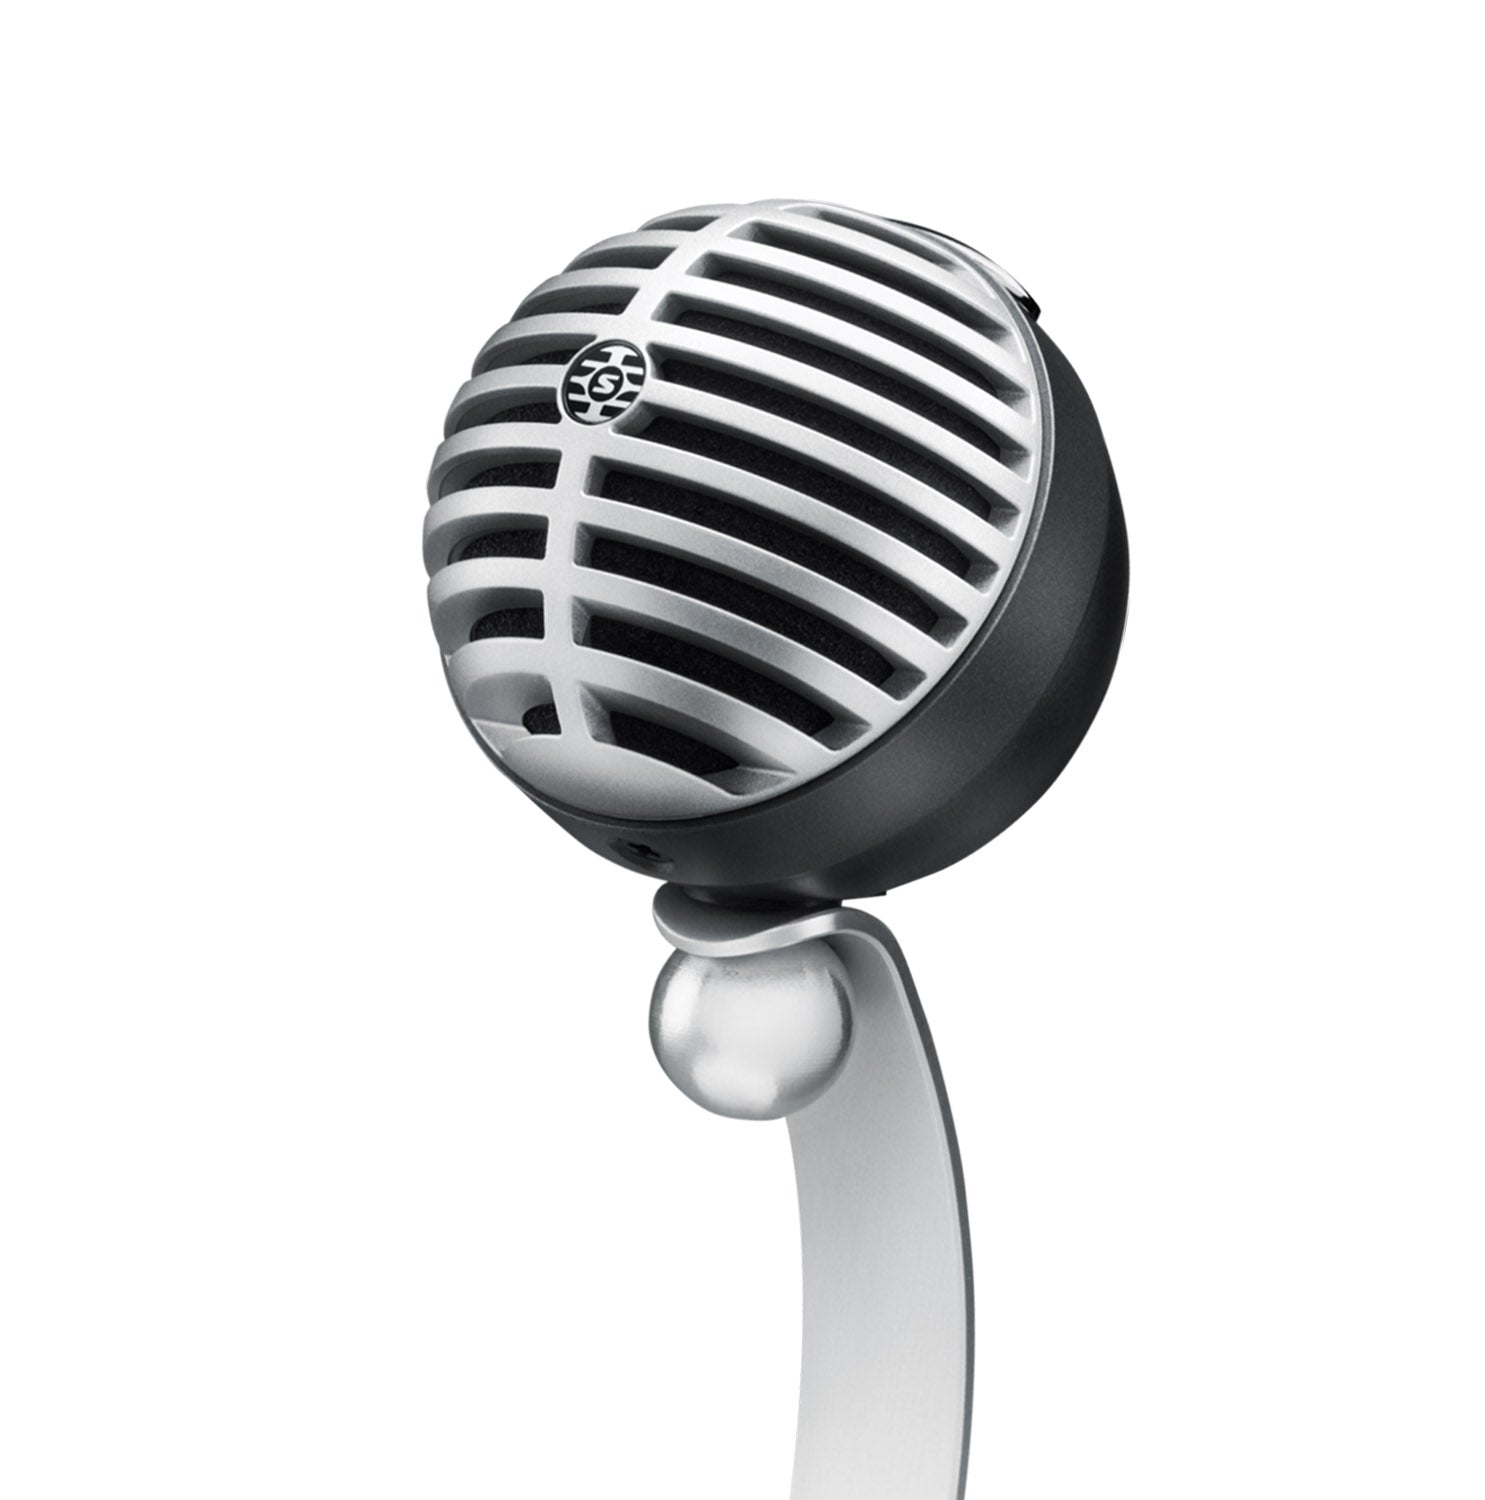 B-Stock: Shure MV5/A-LTG Digital Condenser Microphone With USB and Lighting Cable by Shure